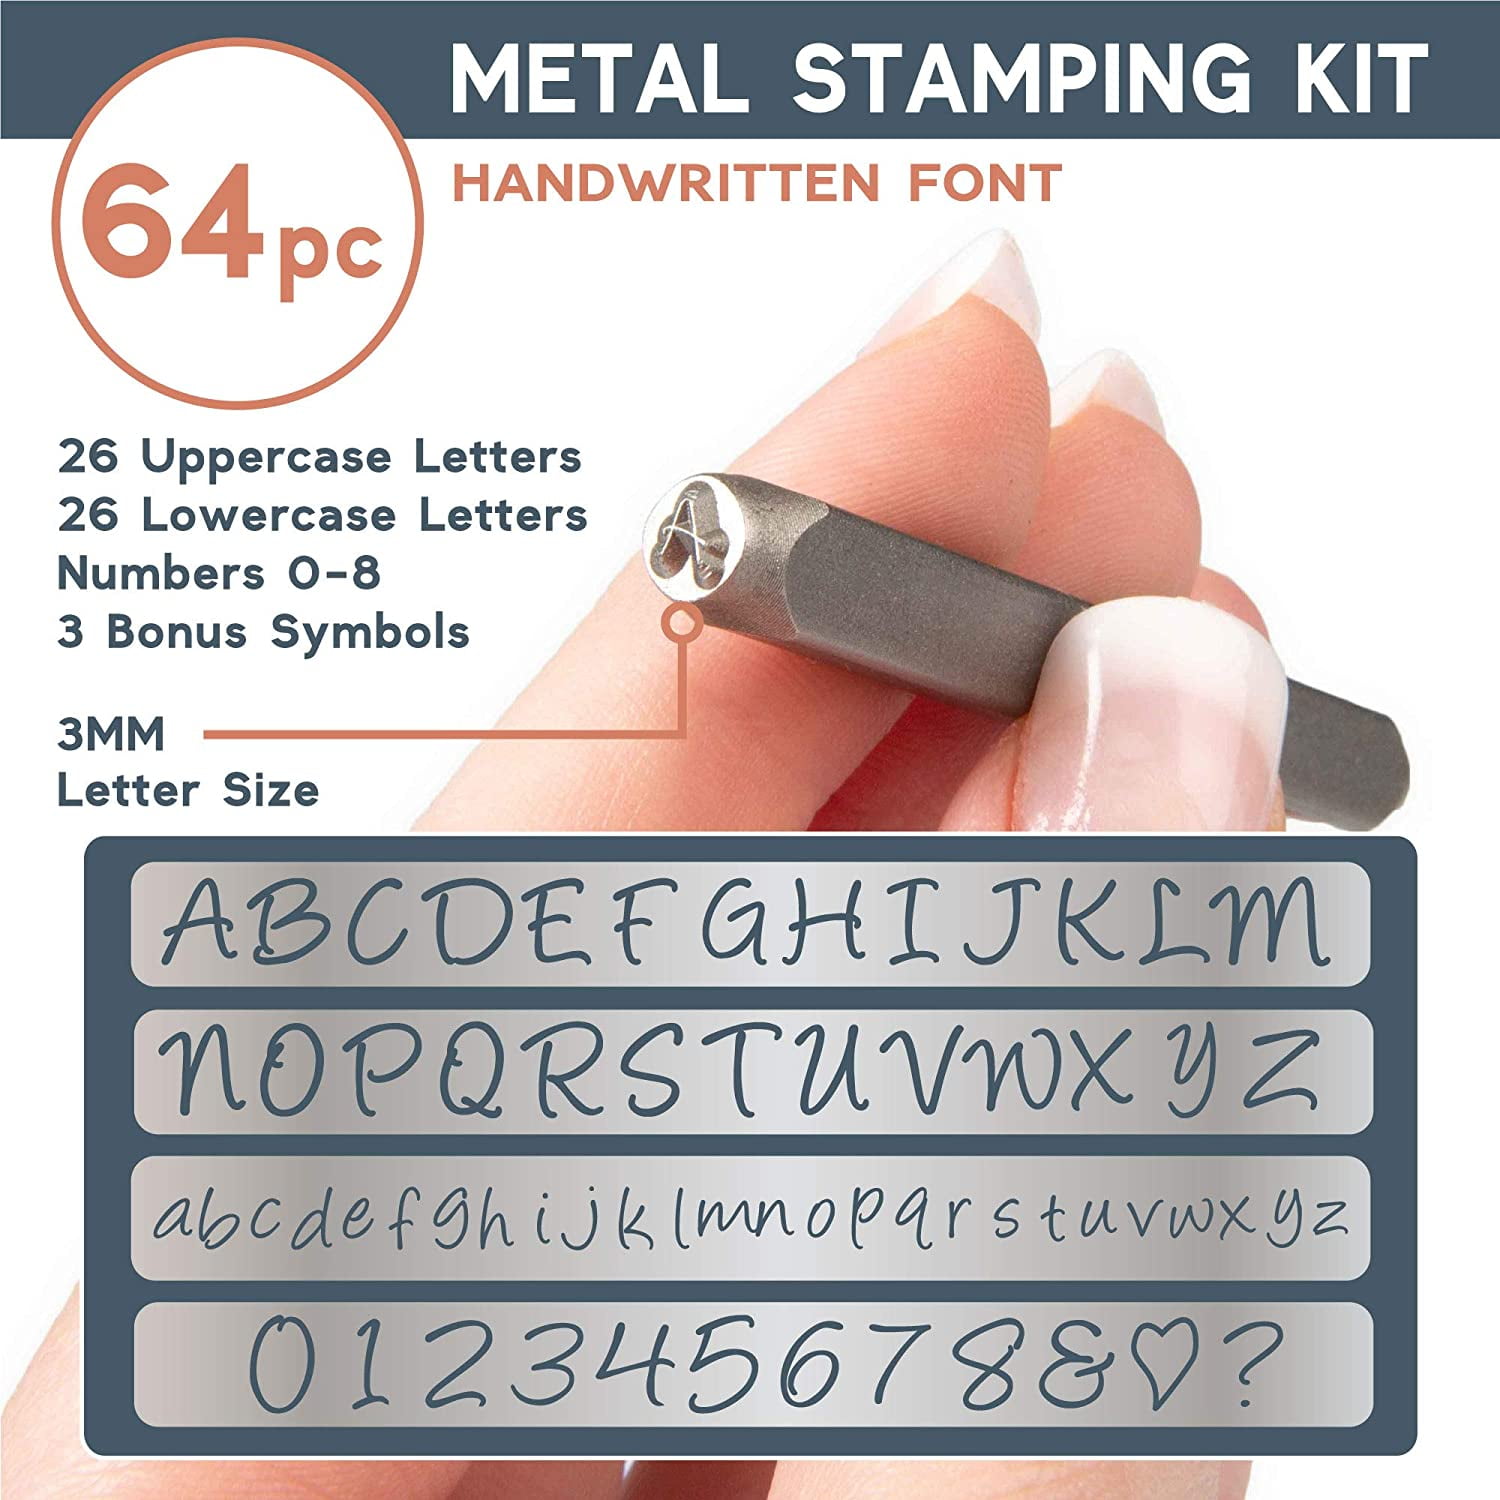 Crutello Metal Stamping Kit, 64 Piece Punch Set - Number & Letter Stamps for Metal, Jewelry, Wood, Leather & More